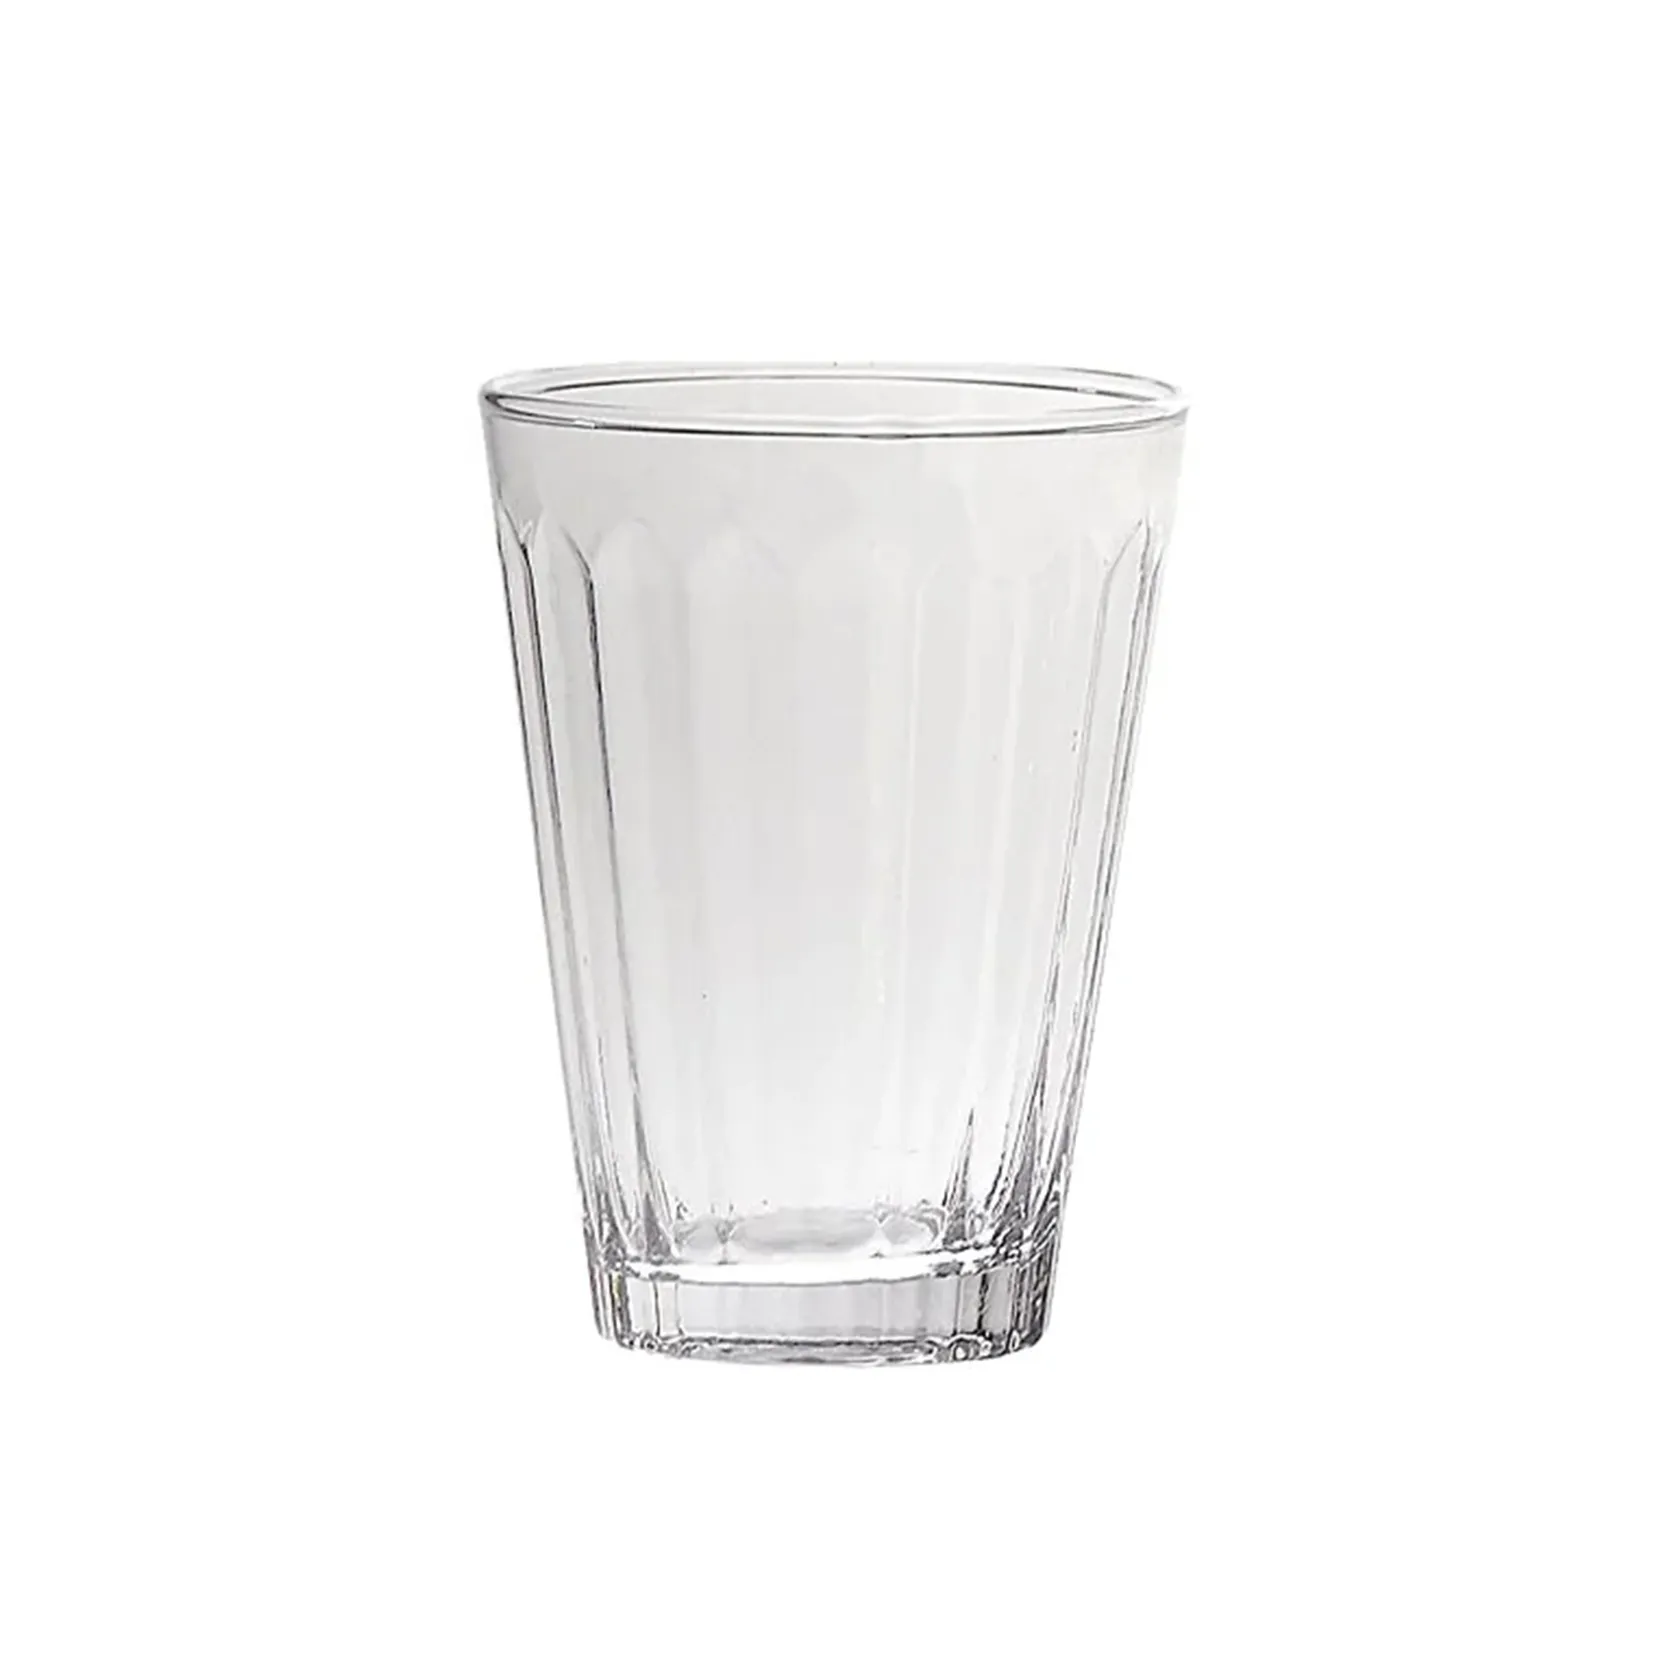 https://www.barthome.shop/114384-thickbox_default/bitossi-set-of-6-water-glasses-lucca.jpg